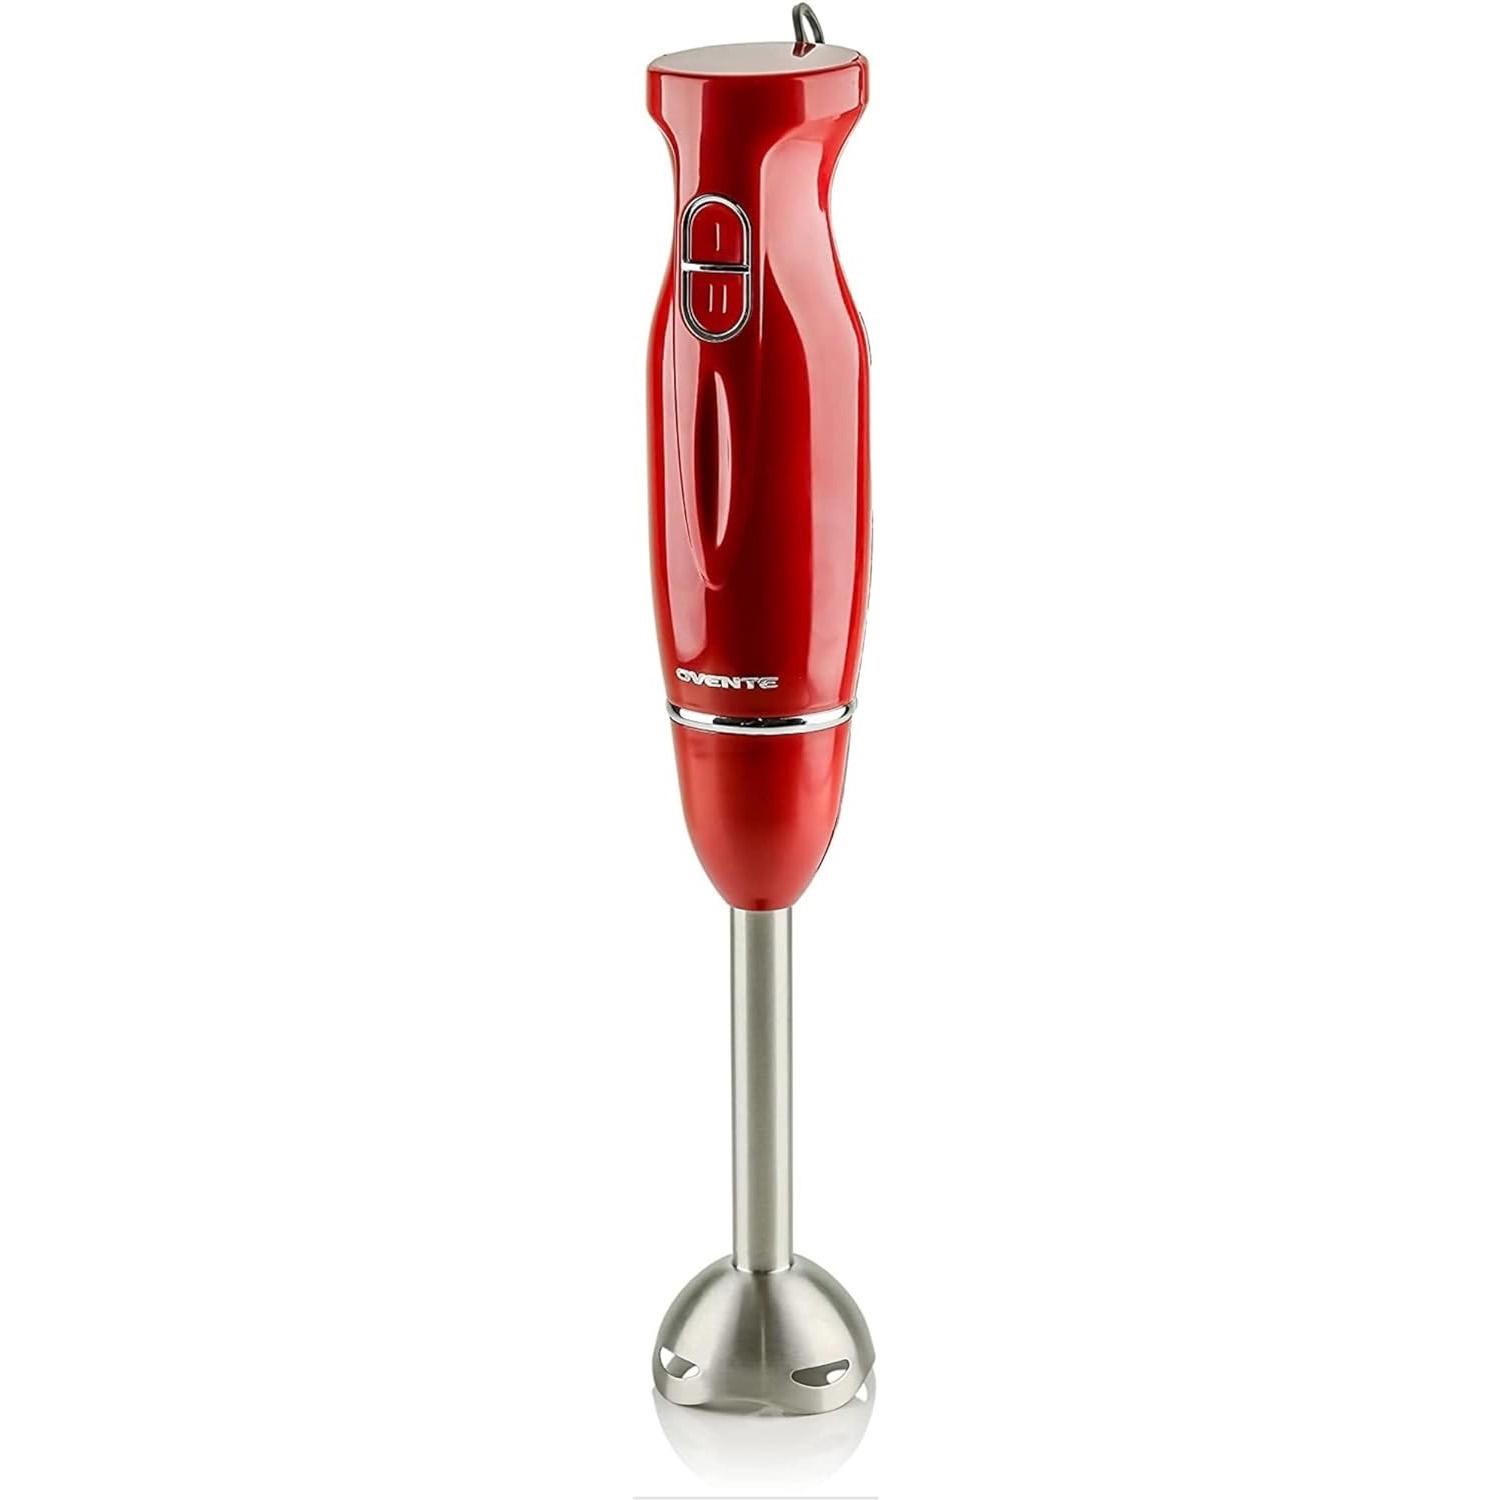 Ovente Electric Immersion Hand Blender 300W 2 Mixing Speed for $11.69